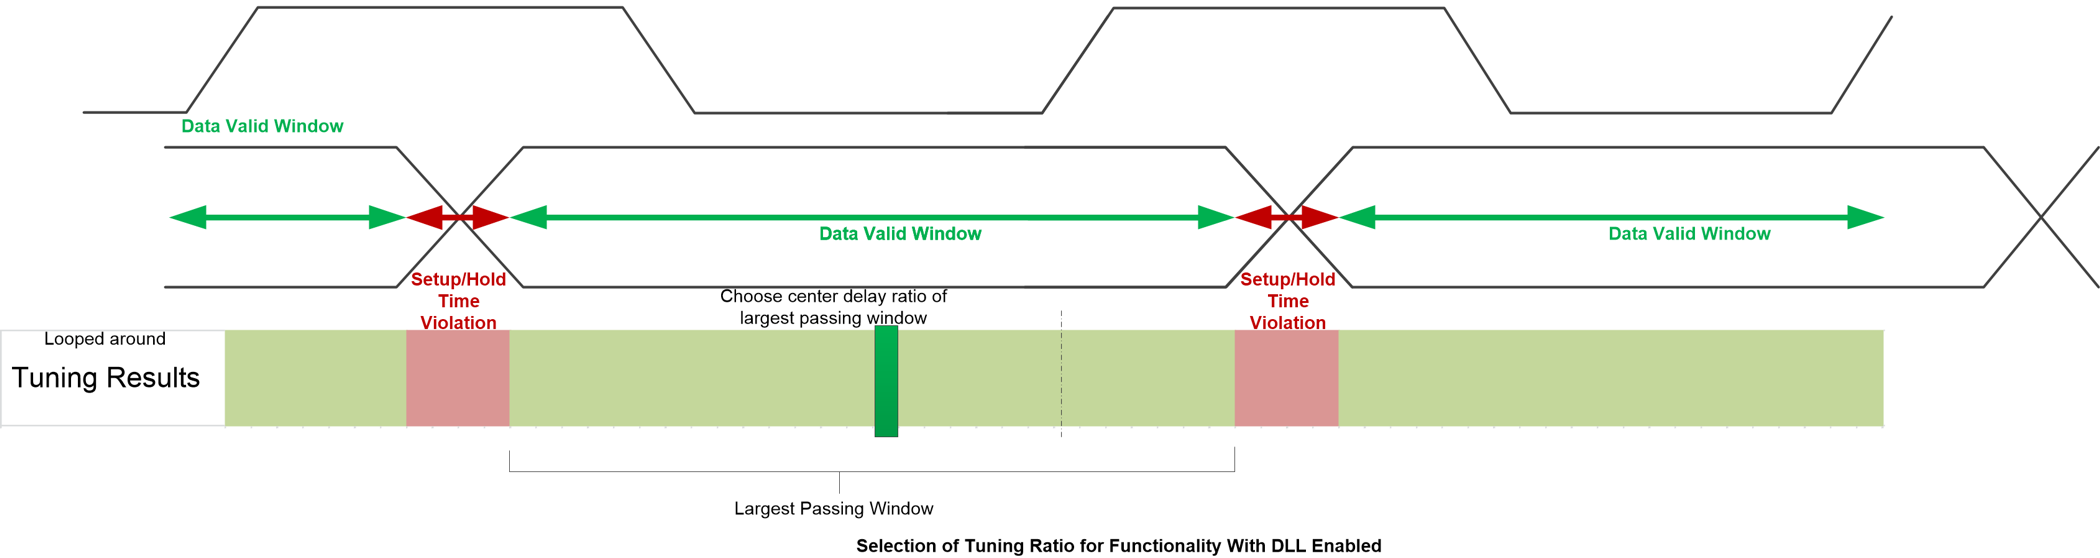  Selection of Tuning Ratio for
                Functionality With DLL Enabled